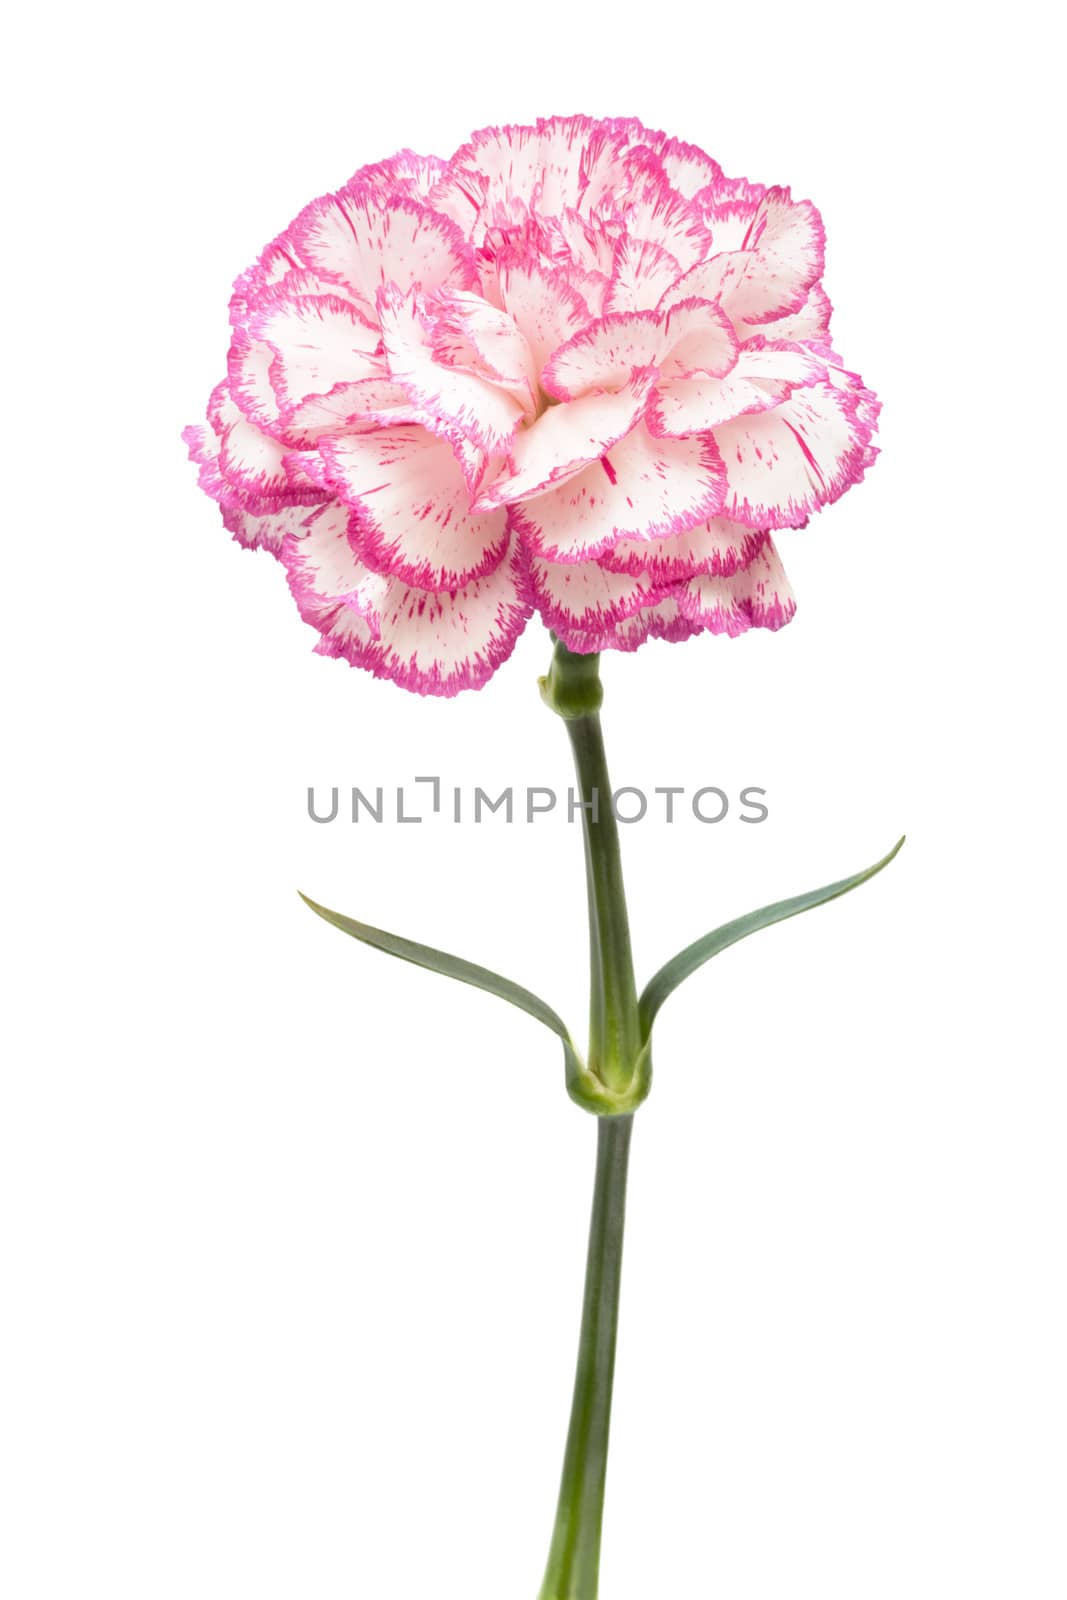 Beautiful pink flower on a white background